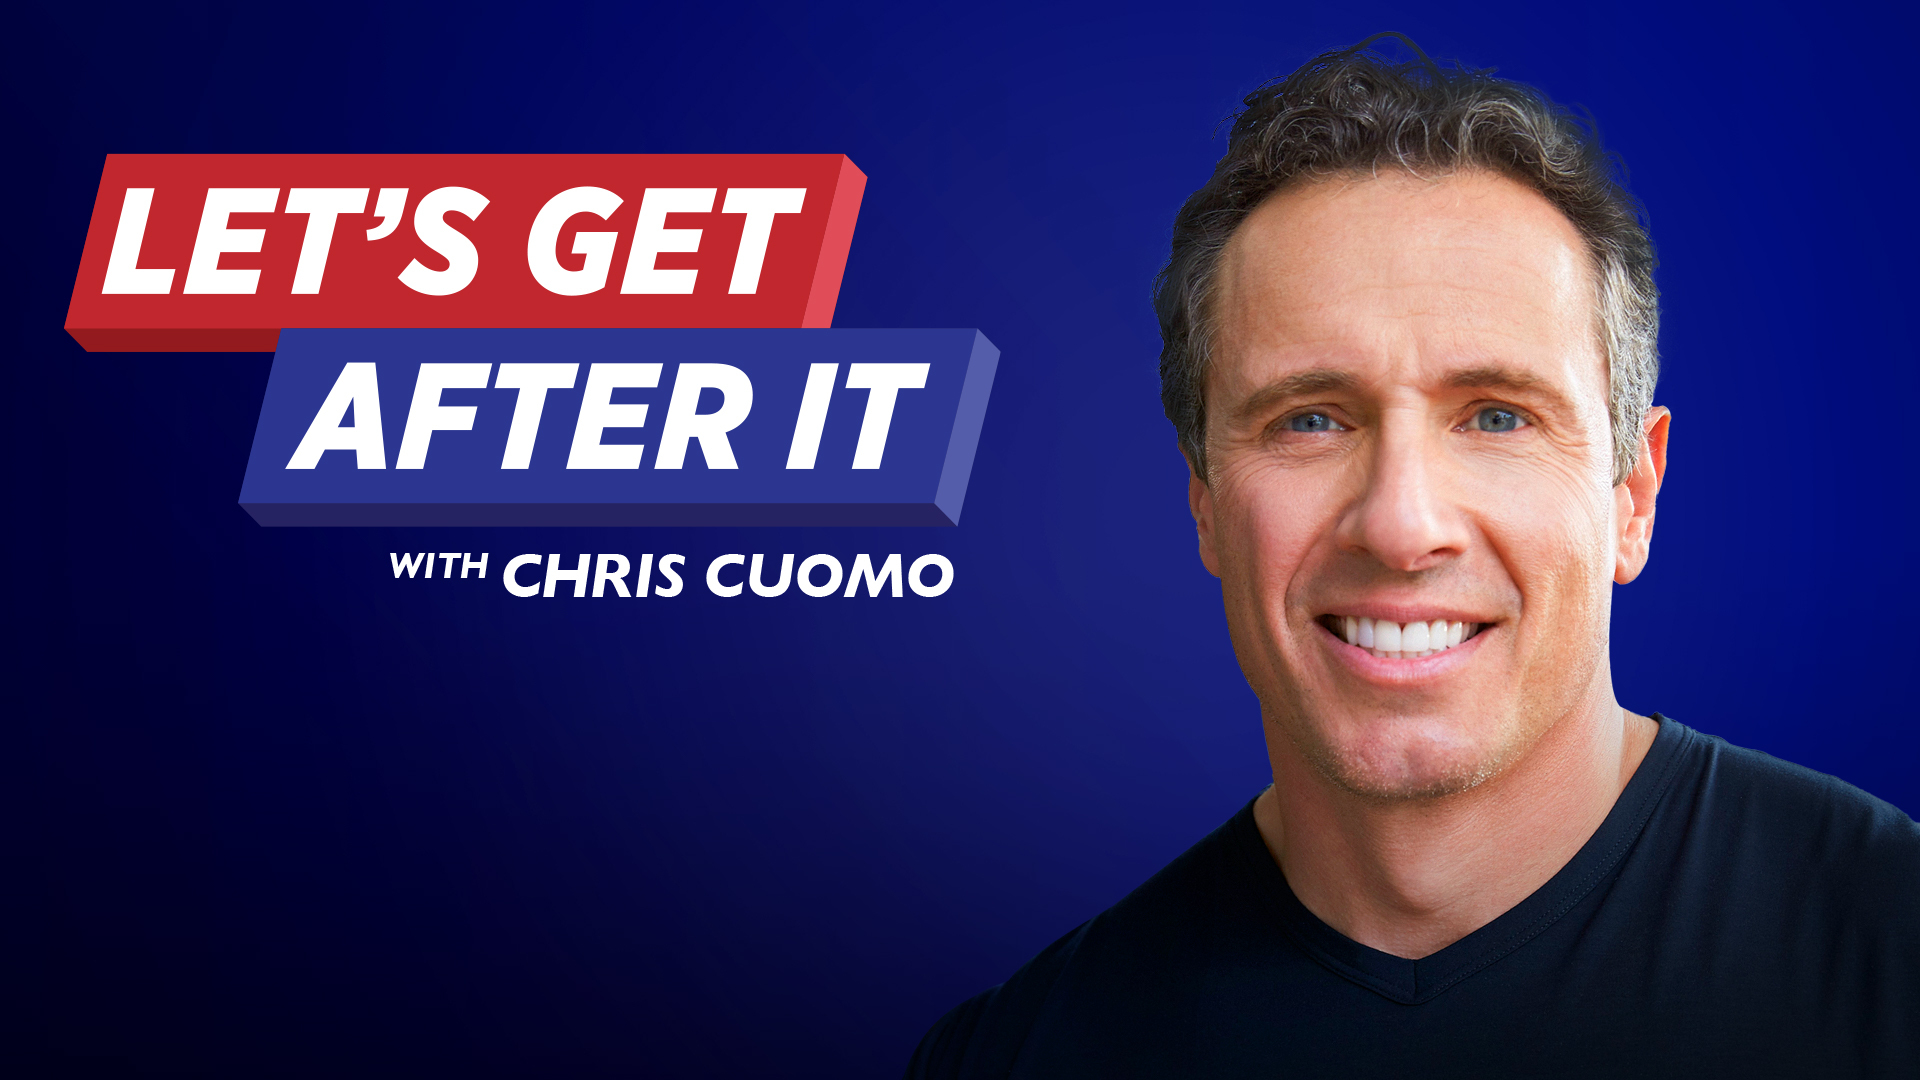 SiriusXM Lets Get After It Chris Cuomo podcast